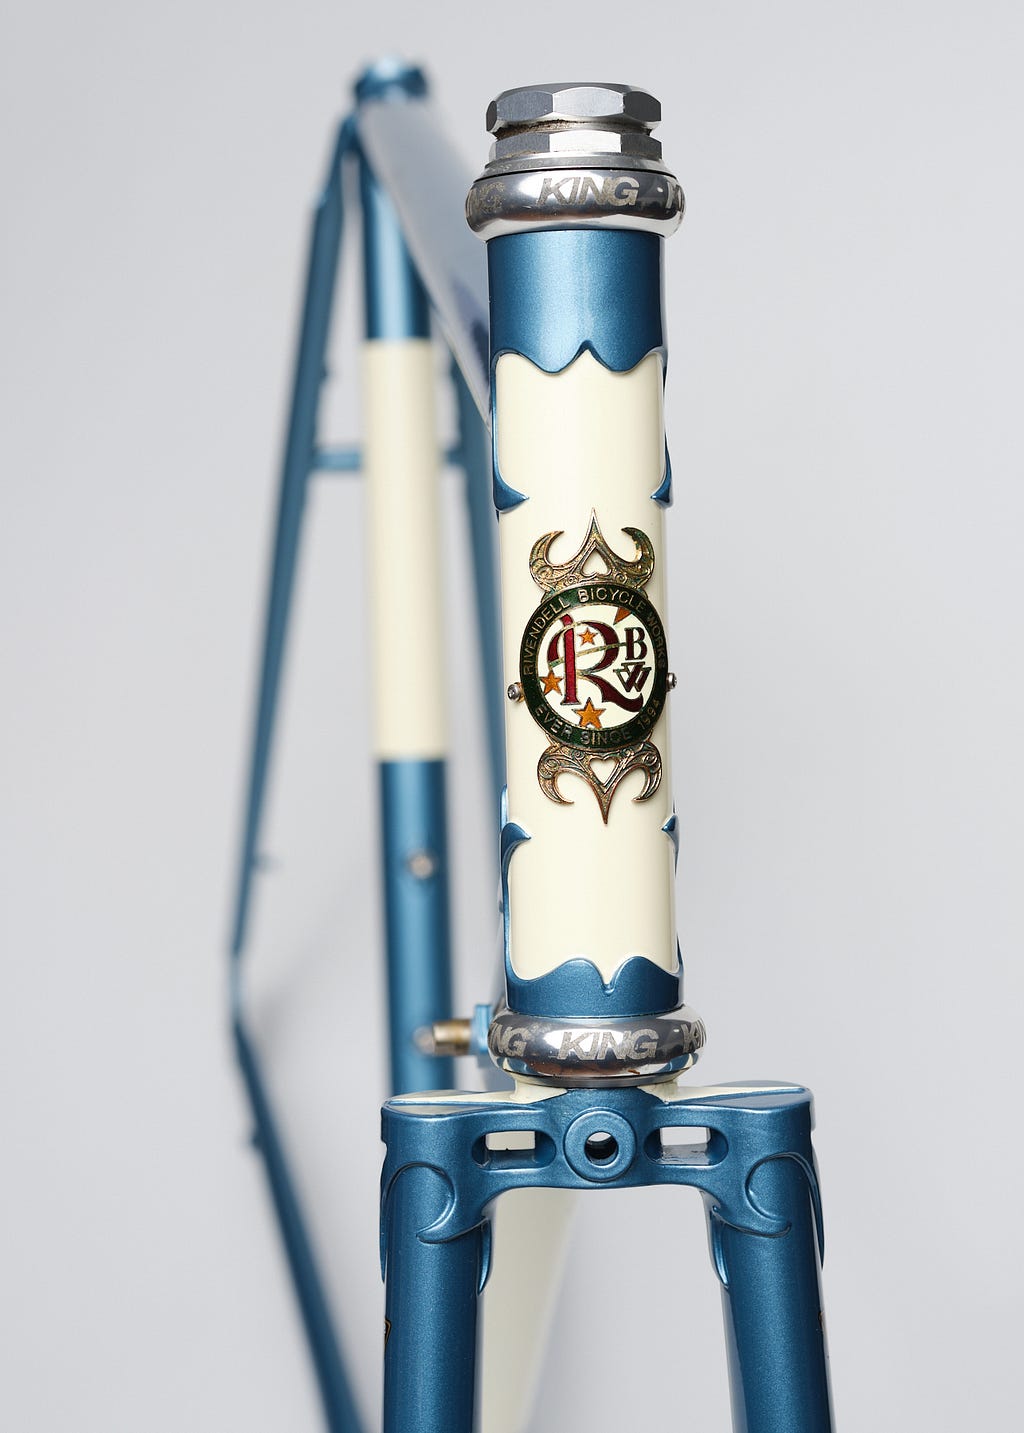 Head Badge of a 1995 Rivendell Road Frame